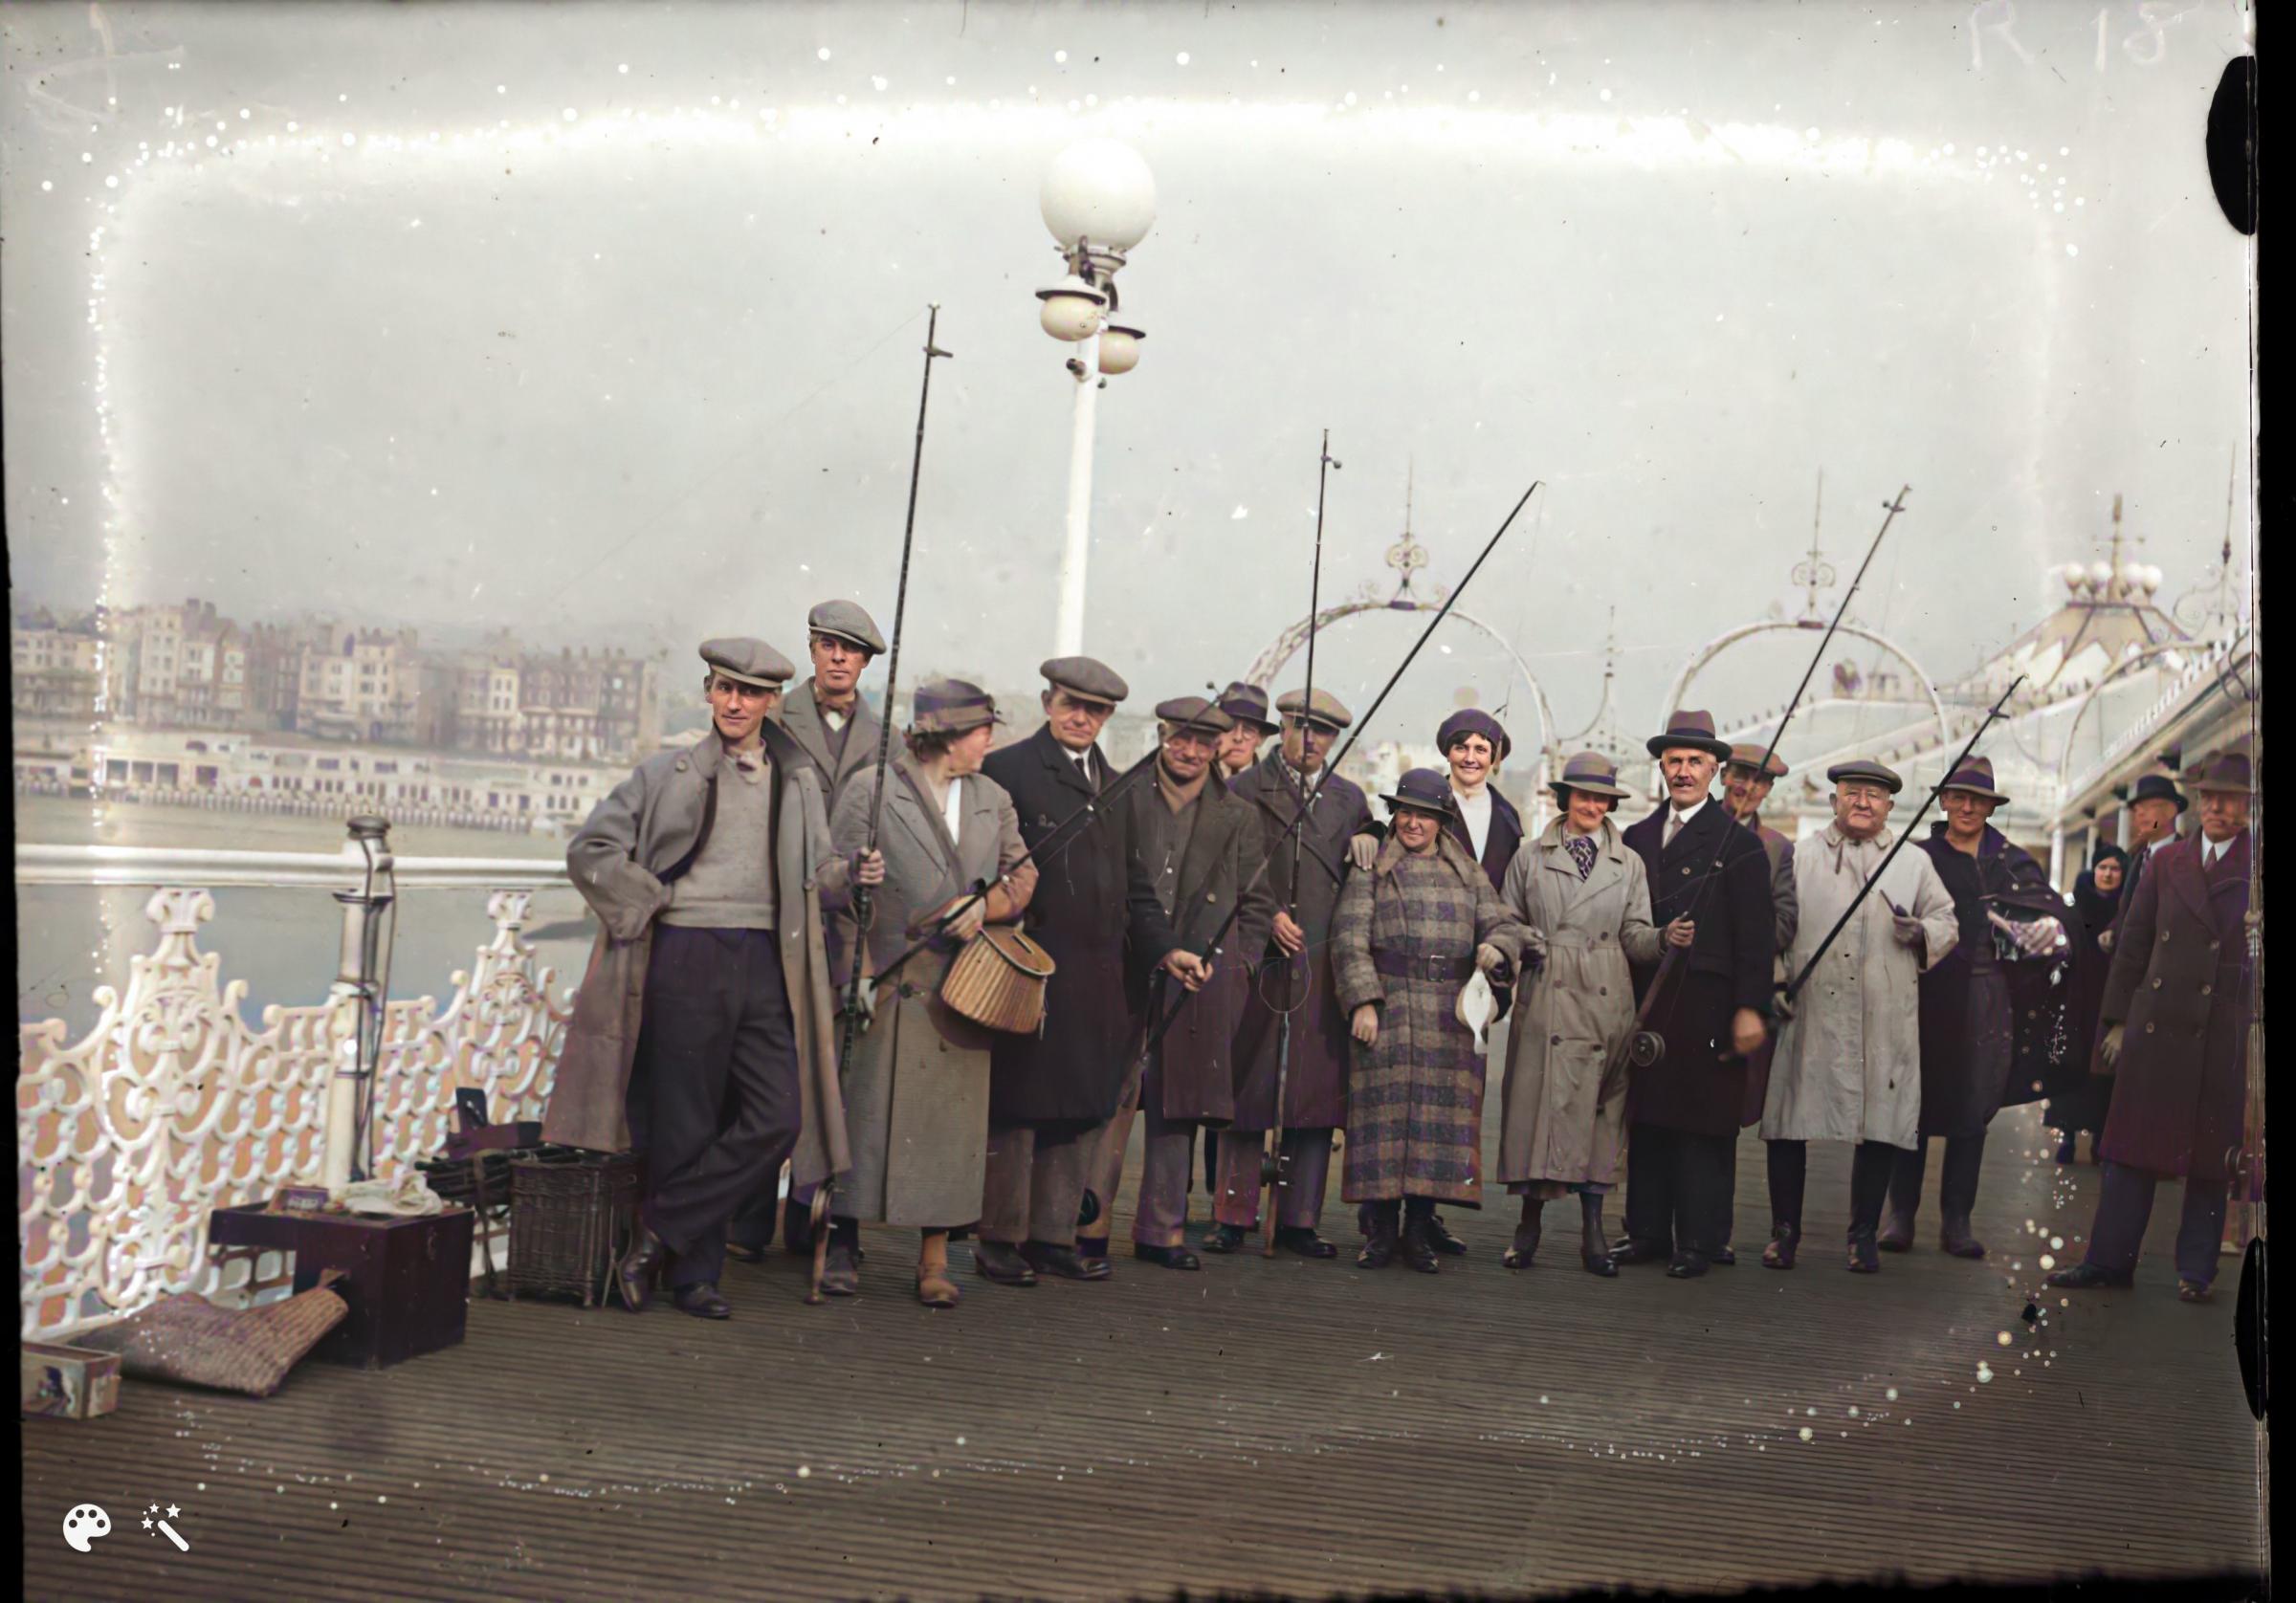 Anglers on the Palace Pier in the late 1930s